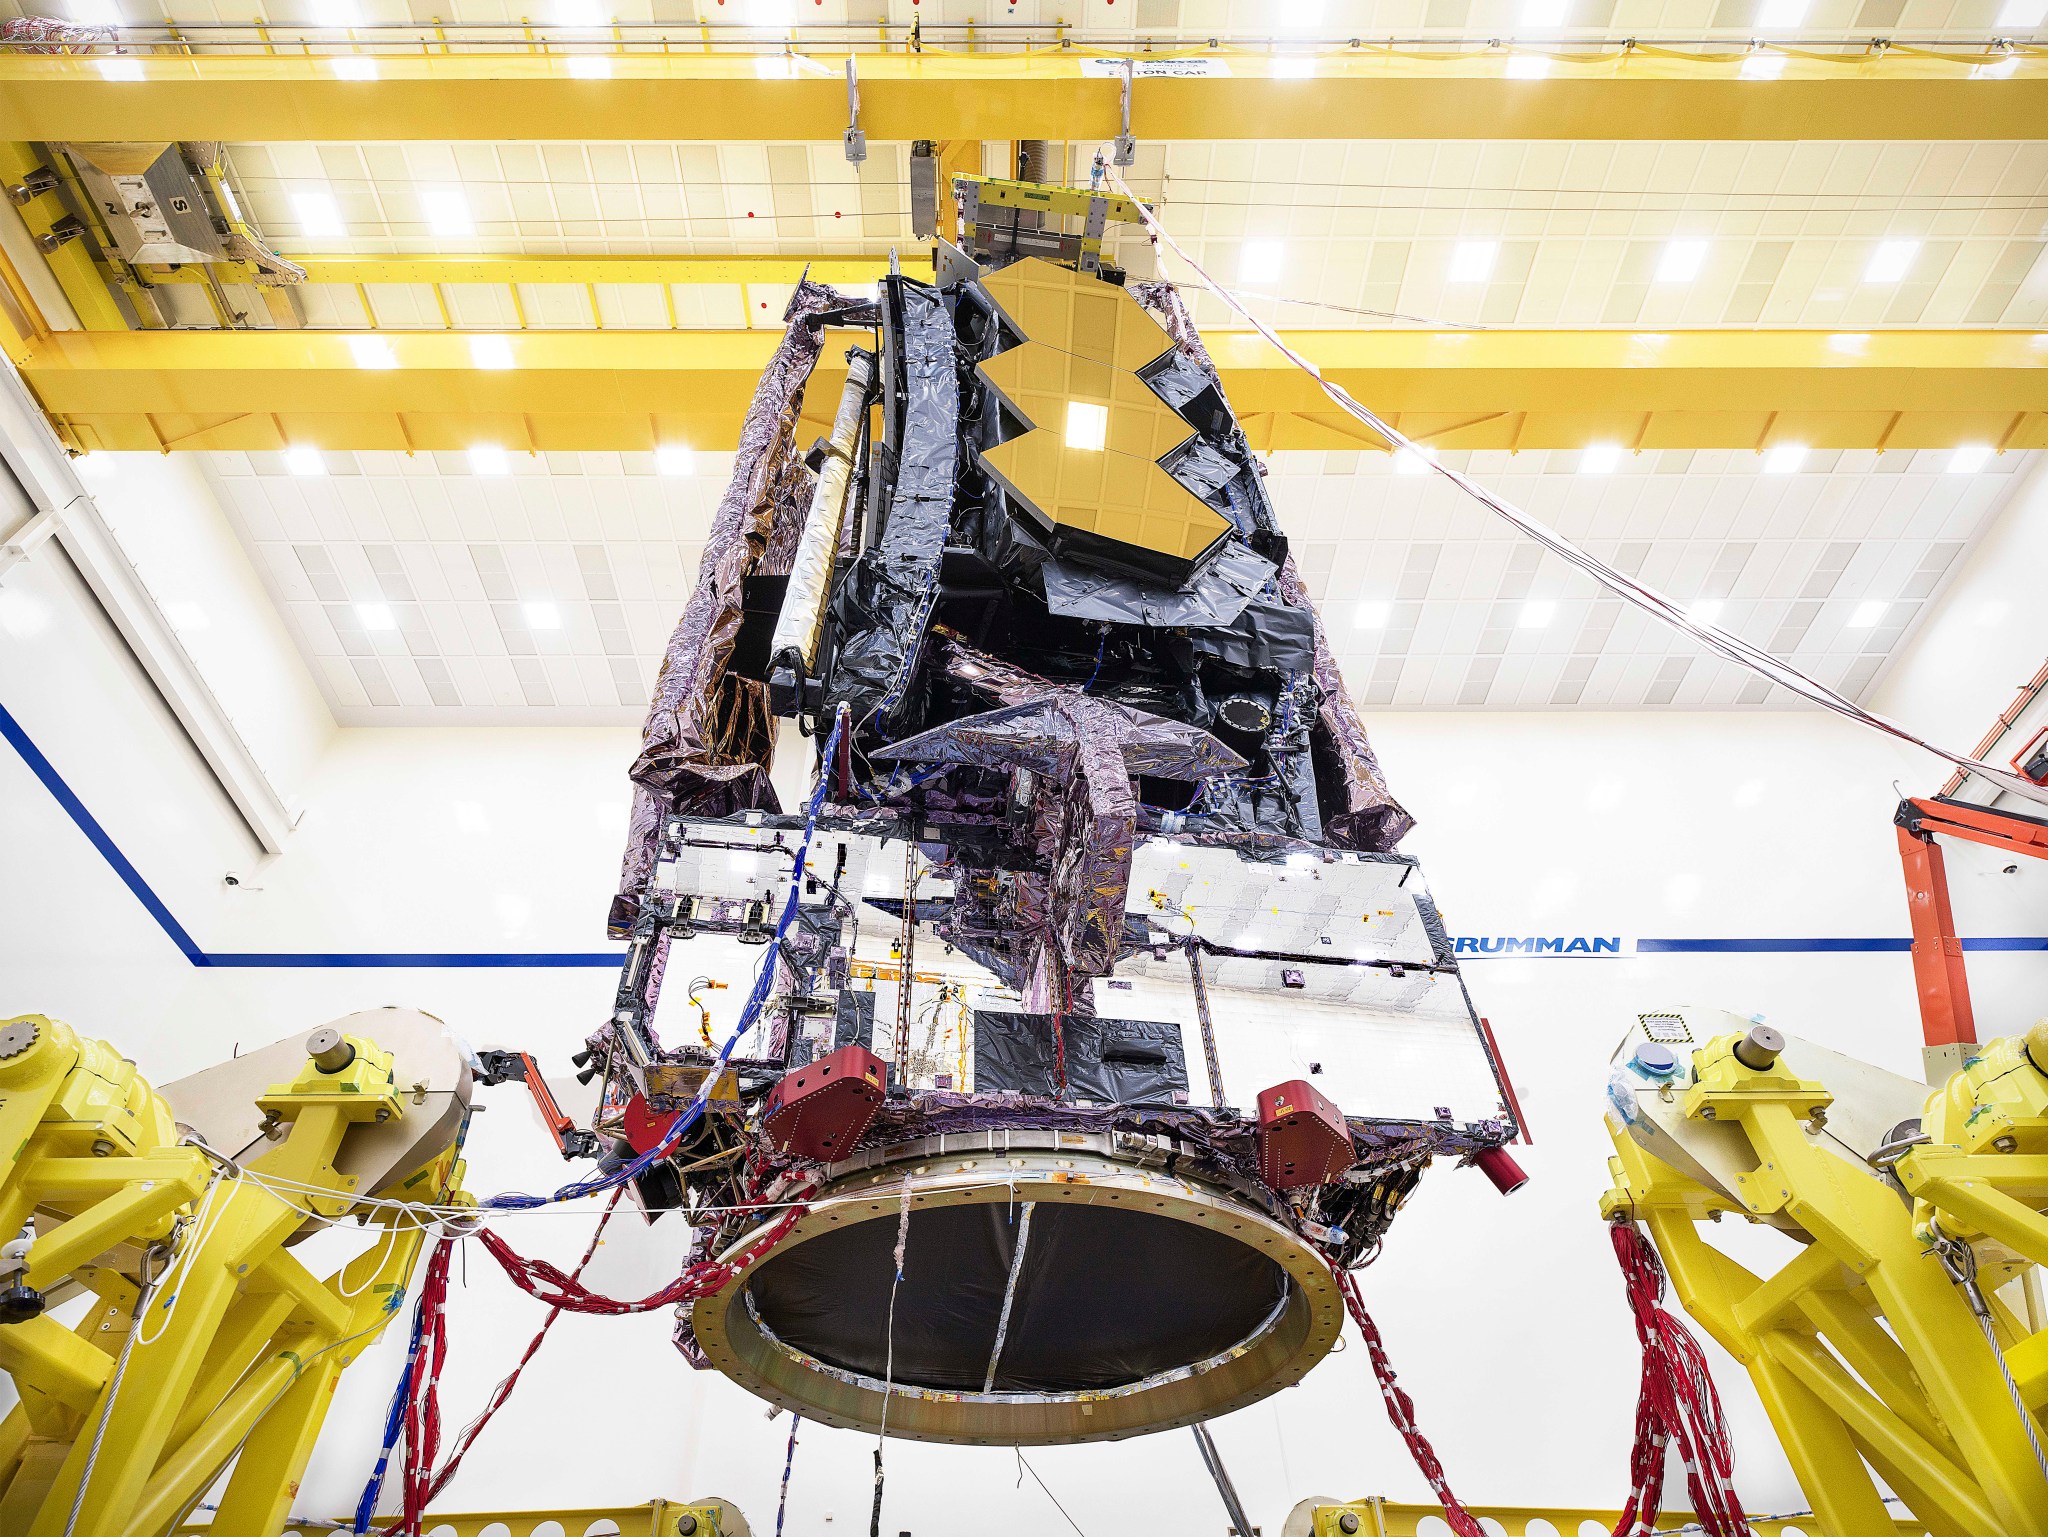 Technicians prepare the James Webb Space Telescope for transport to nearby testing facilities.